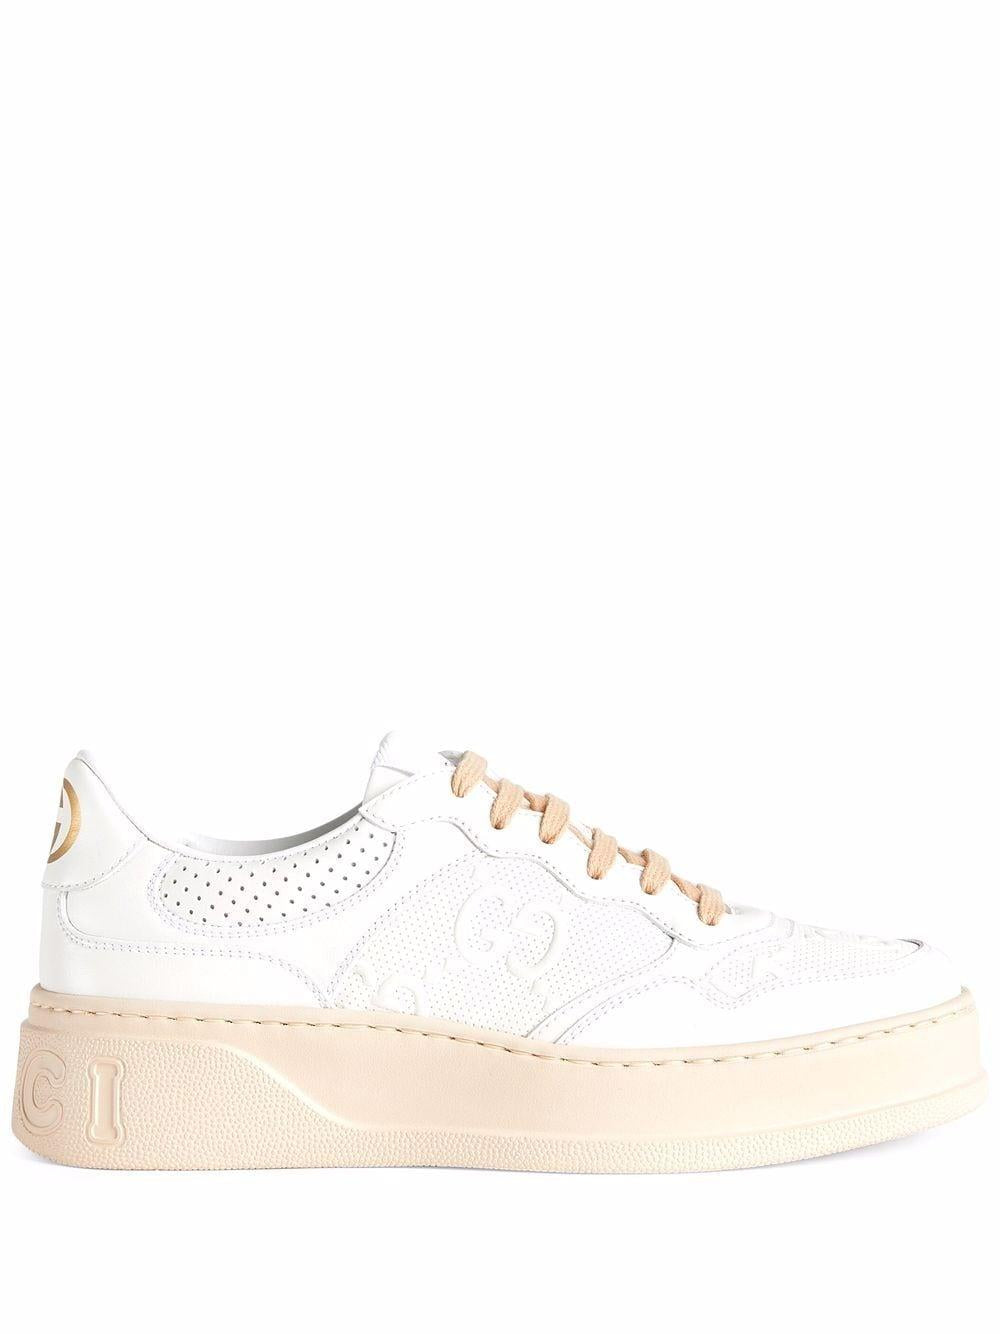 Gucci Embossed Lace-up Sneakers For Women In White